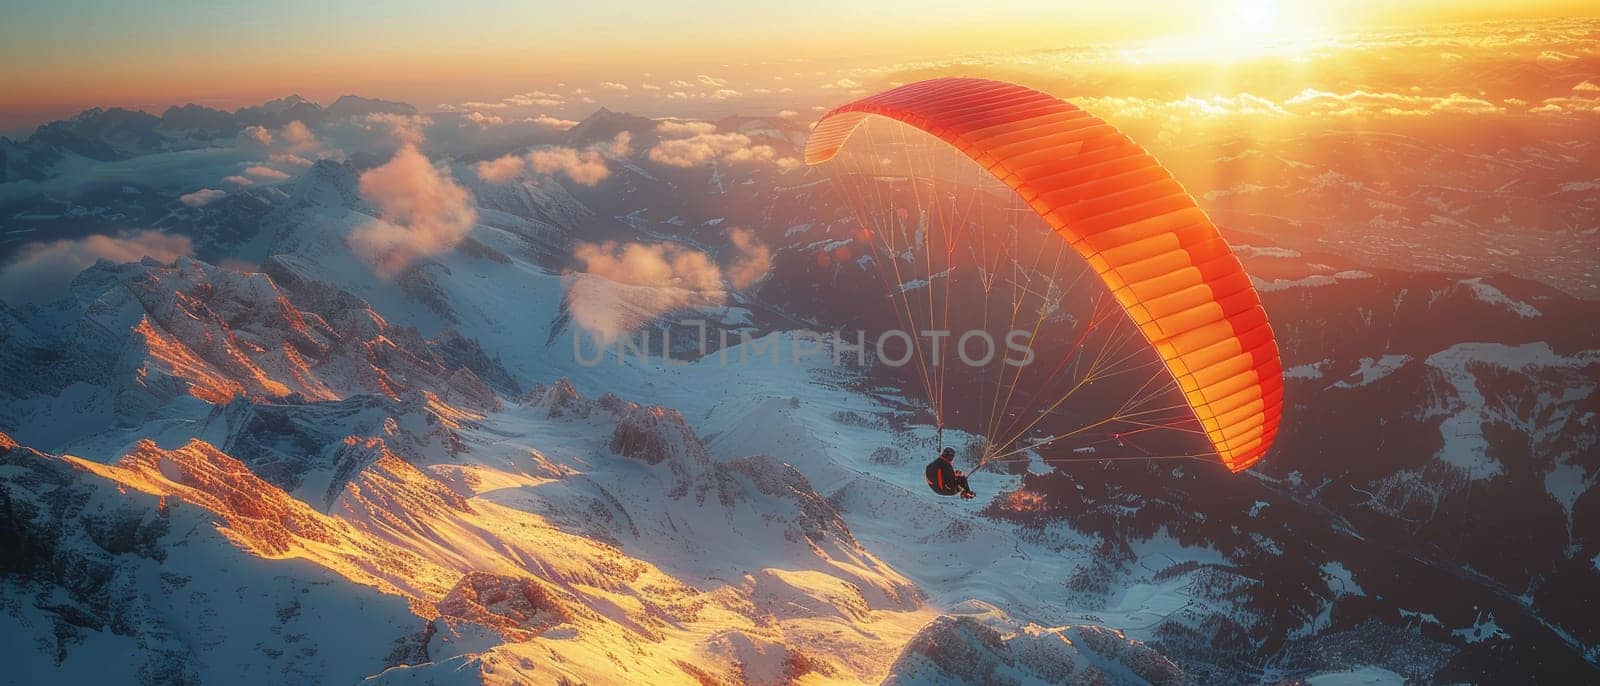 A man is flying a parachute in the sky. The sky is orange and the sun is setting